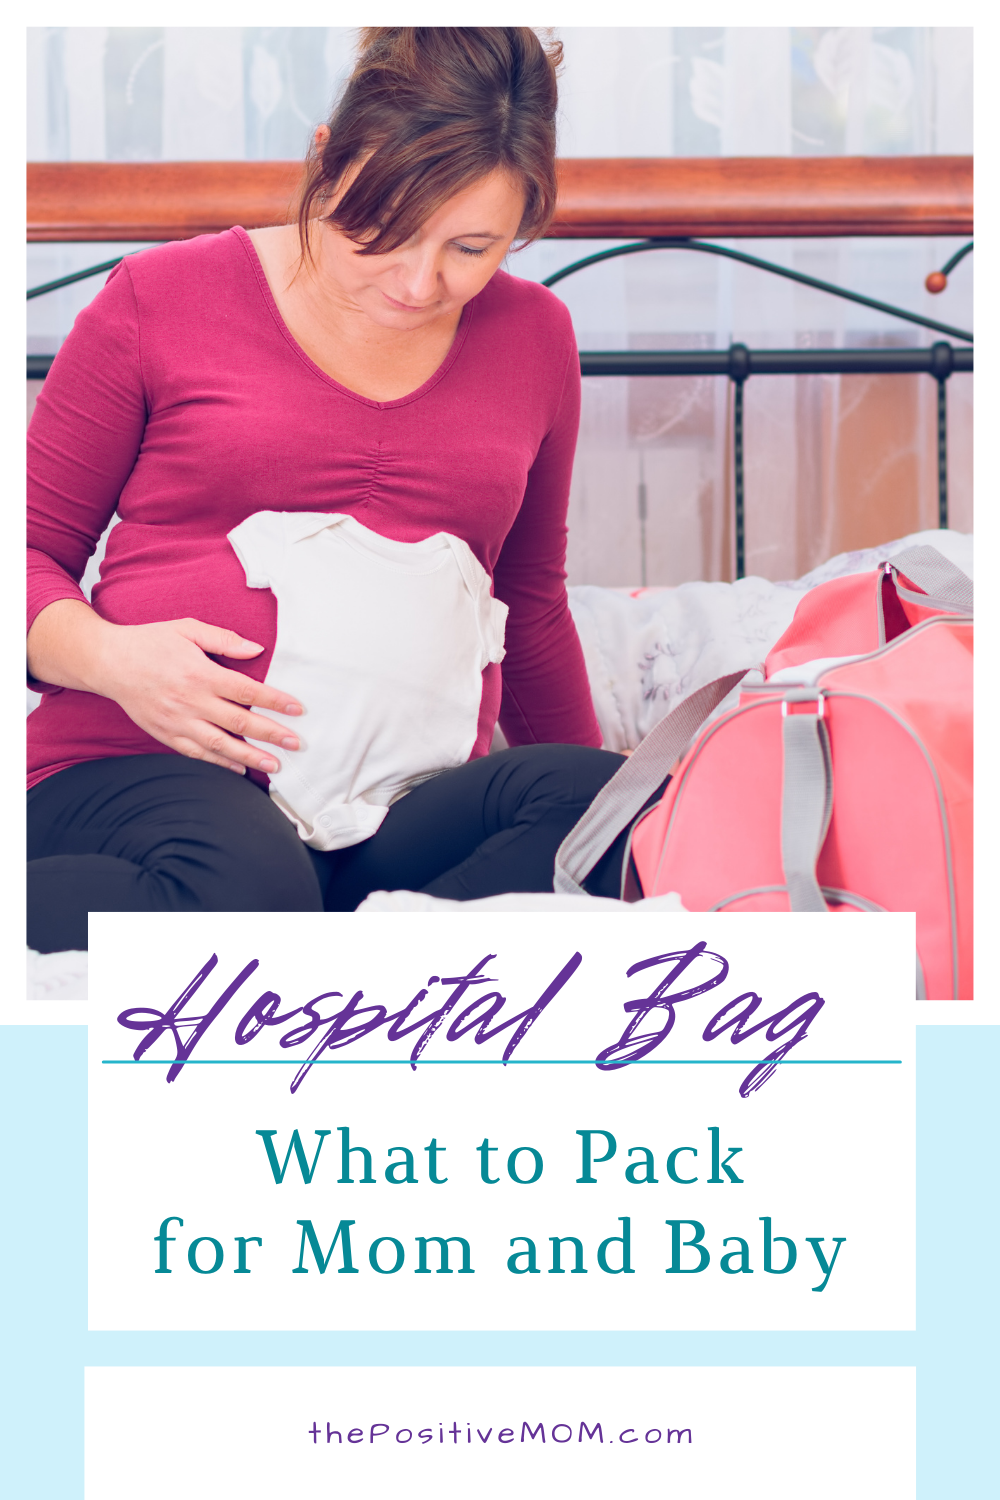 What I Packed in My Hospital Bag  Mom & Baby Checklist - Simply